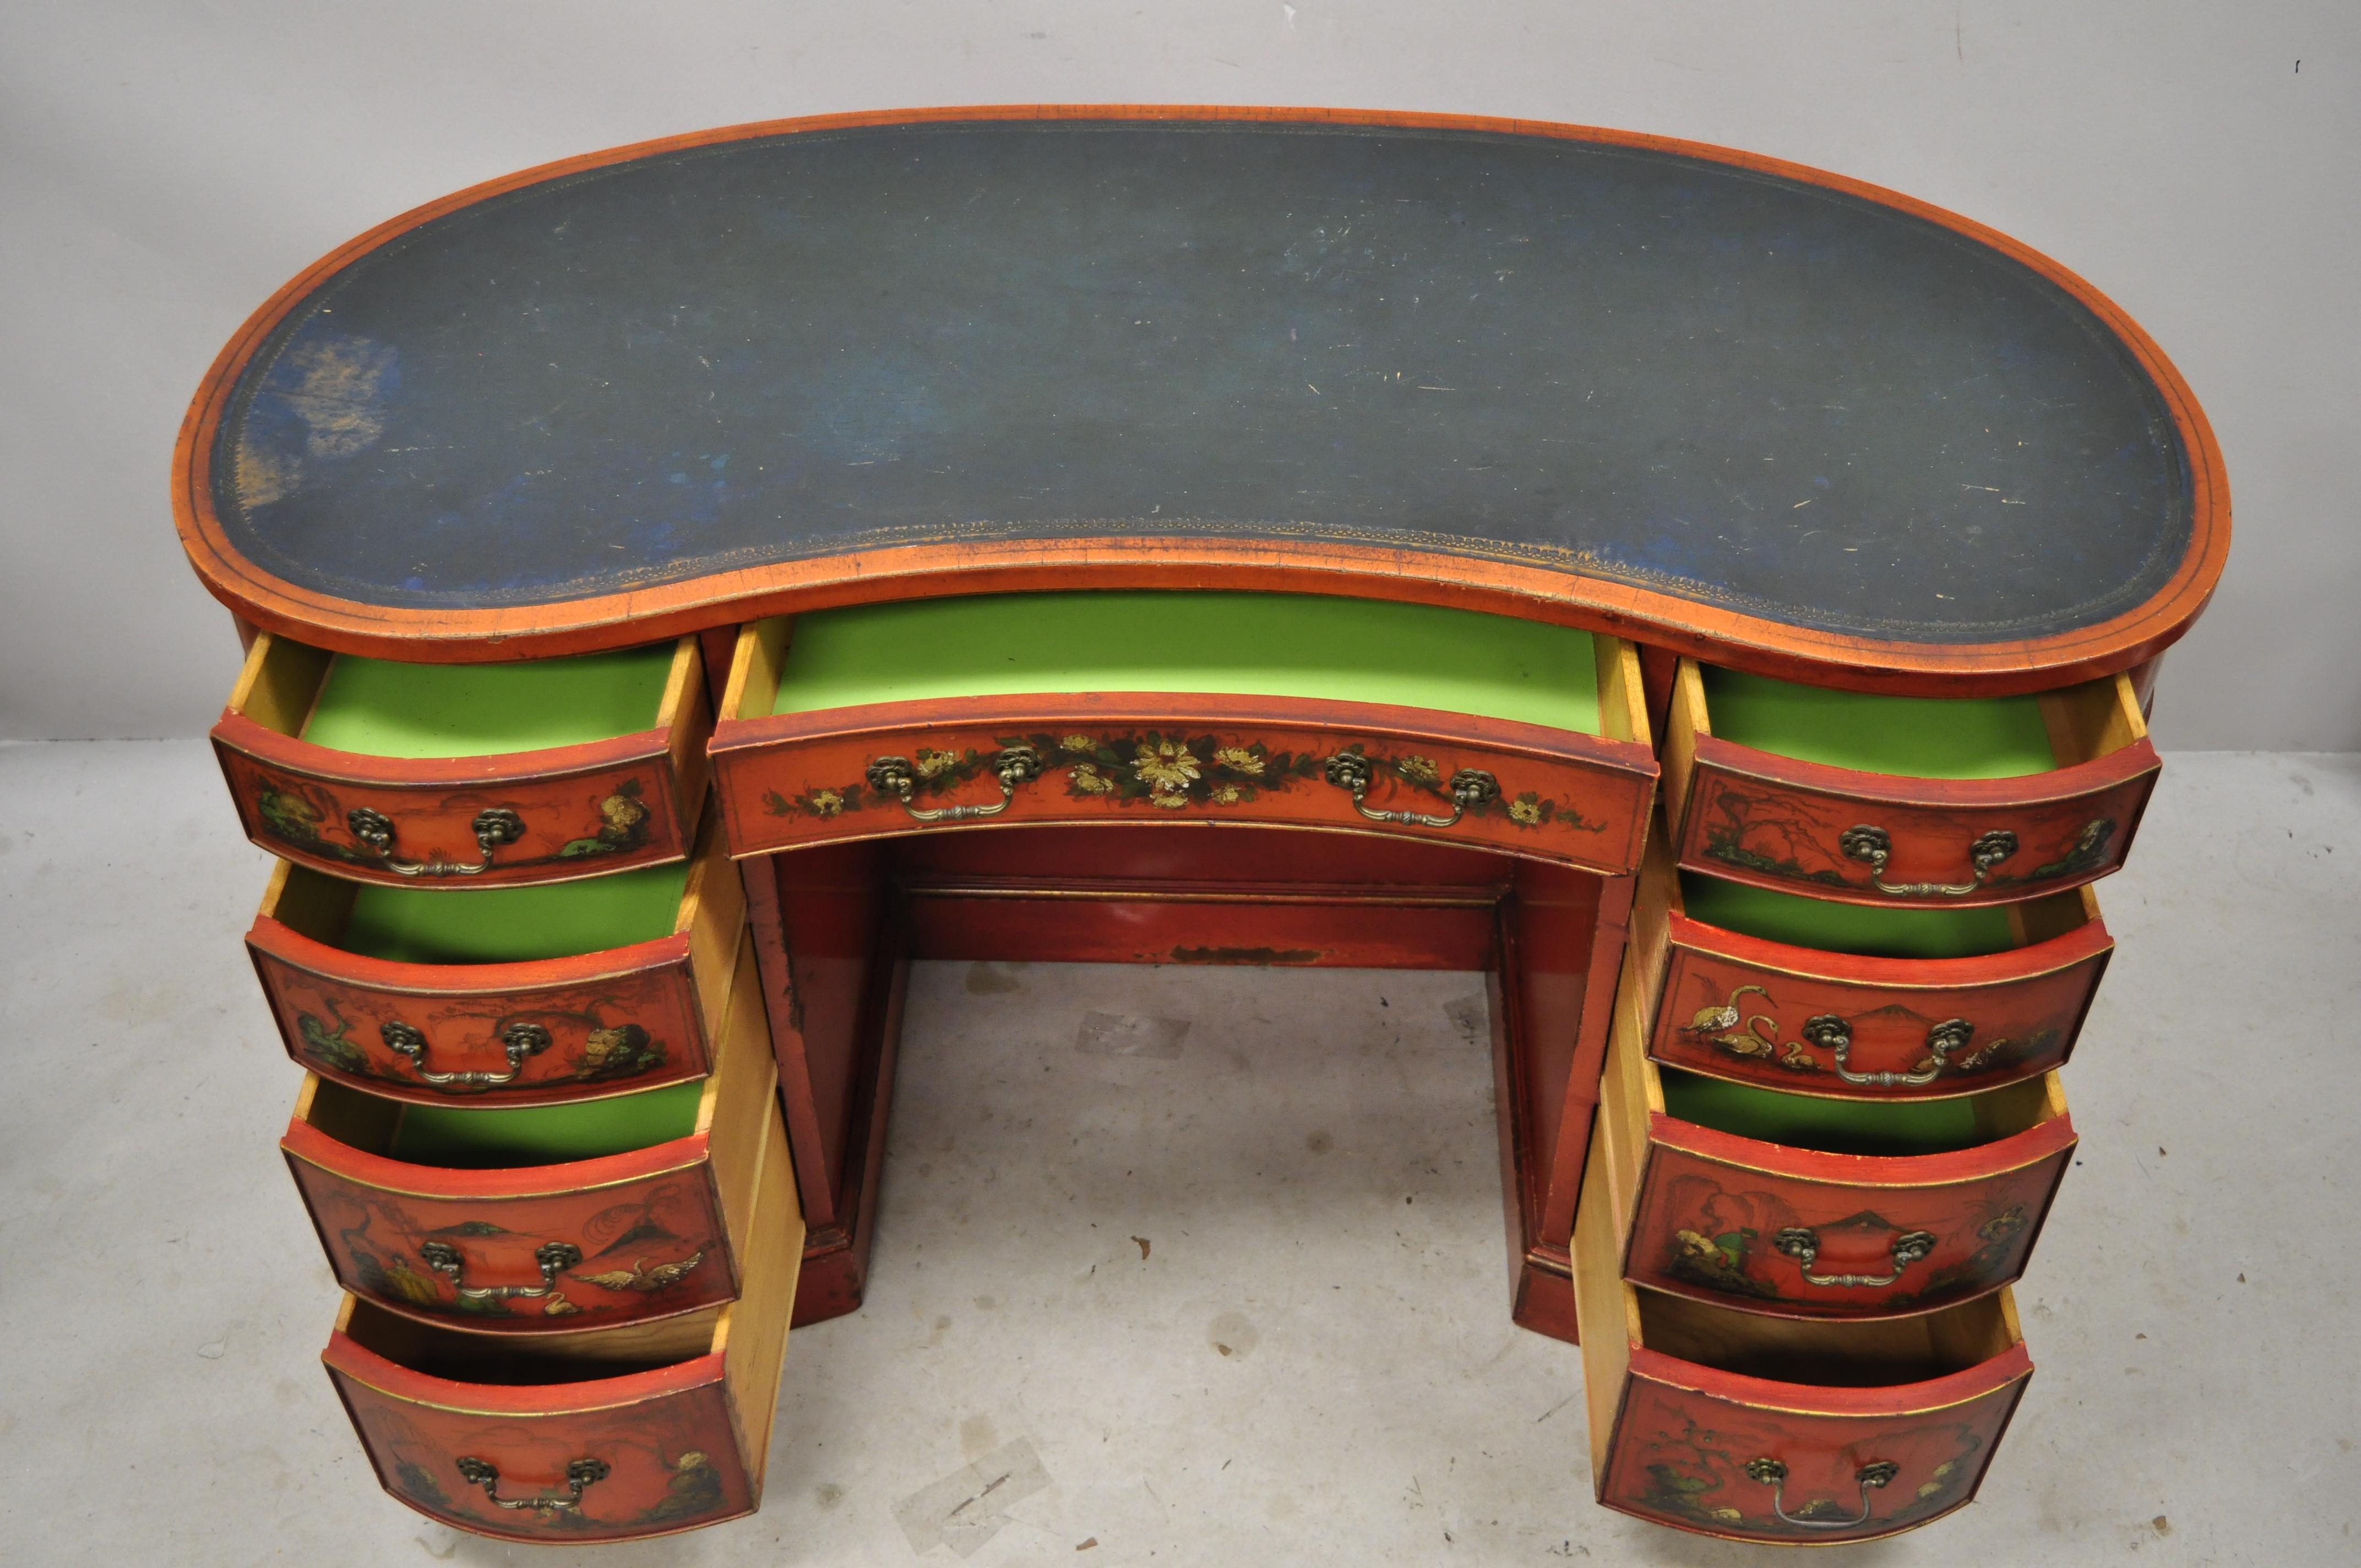 North American Chinoiserie Georgian Oriental Green Leather Top Red Lacquer Kidney Shape Desk